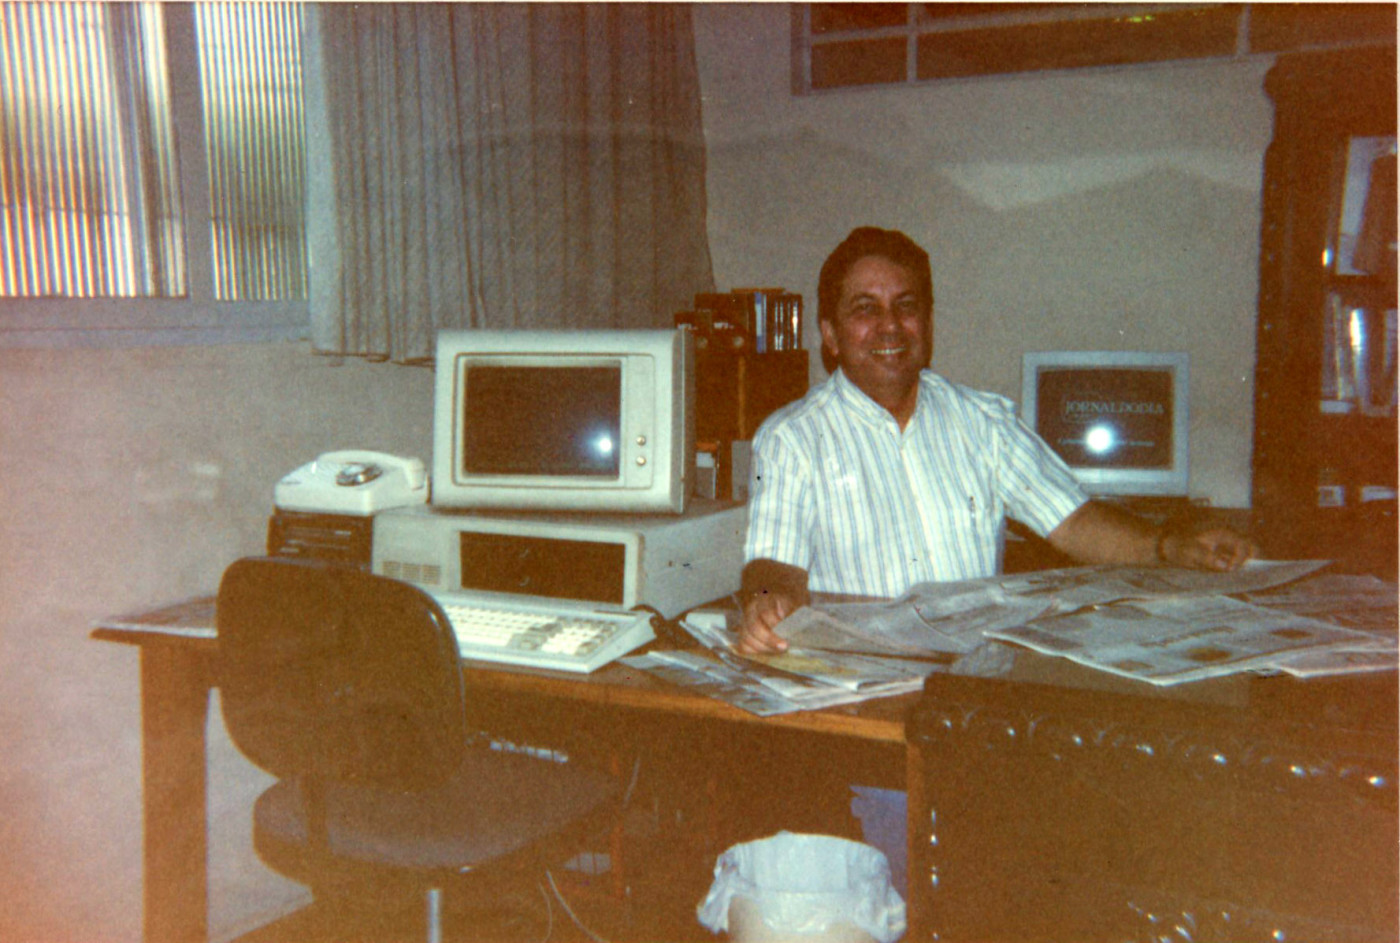 Laura's dad sitting at a desk with computers and papers